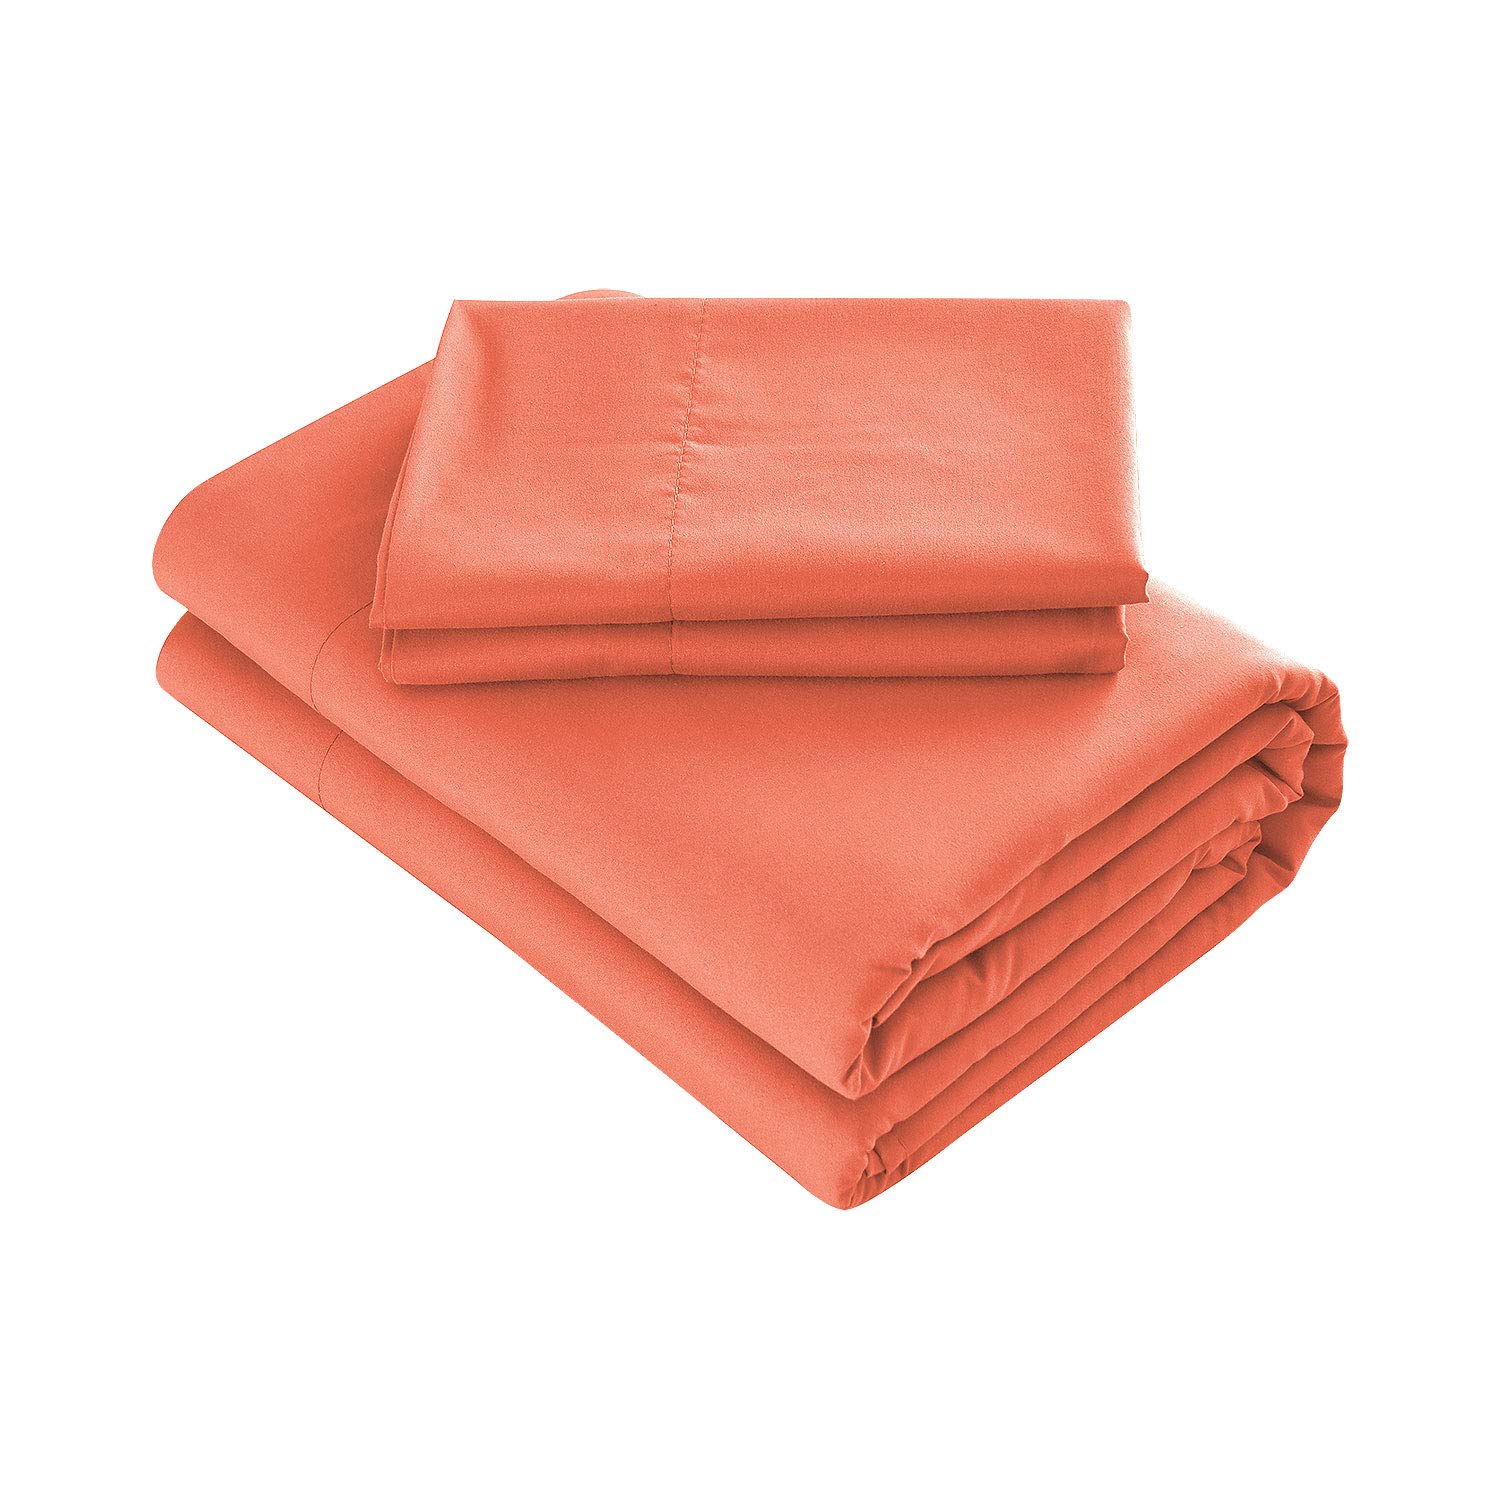 Book Cover Prime Bedding Bed Sheets - 4 Piece King Size Sheets, Deep Pocket Fitted Sheet, Flat Sheet, Pillow Cases - Bright Coral King Bright Coral